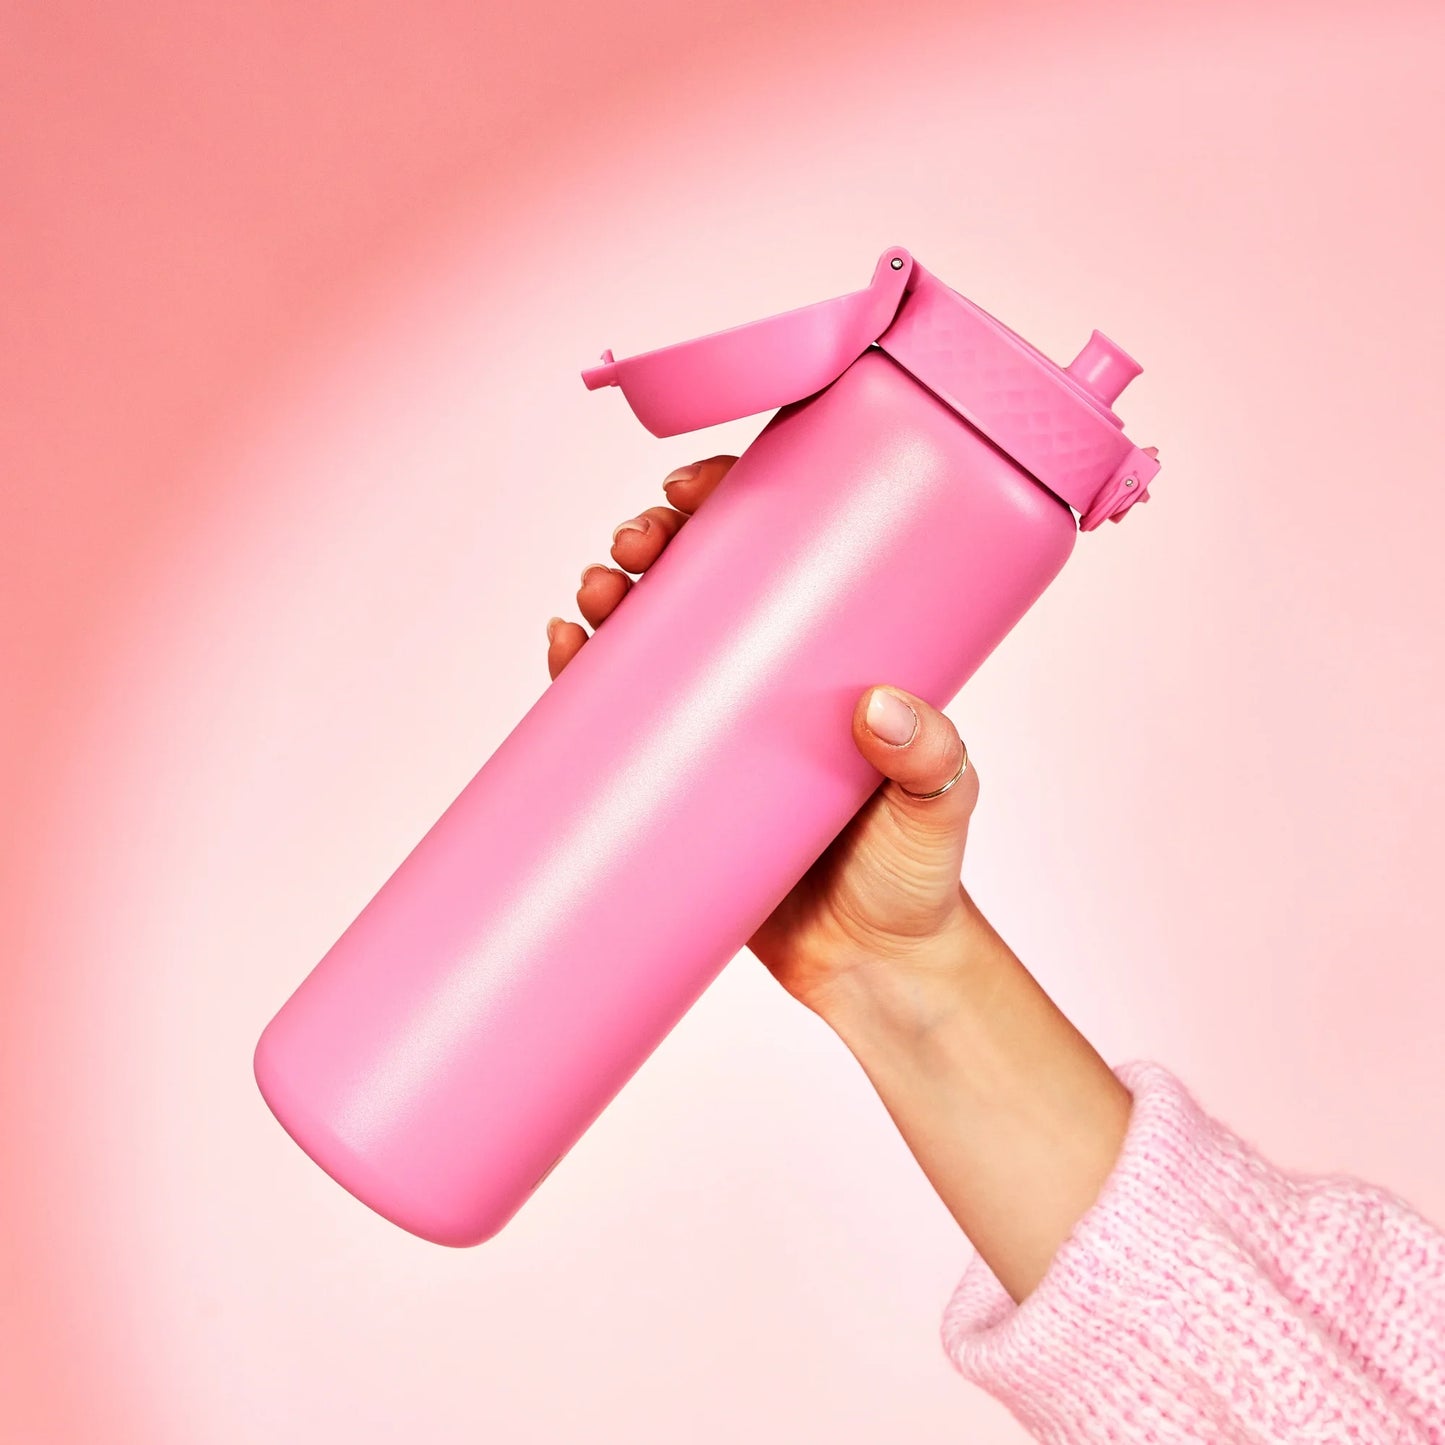 Leak Proof 1 Litre Thermal Water Bottle, Vacuum Insulated, Rose Bloom, 1L